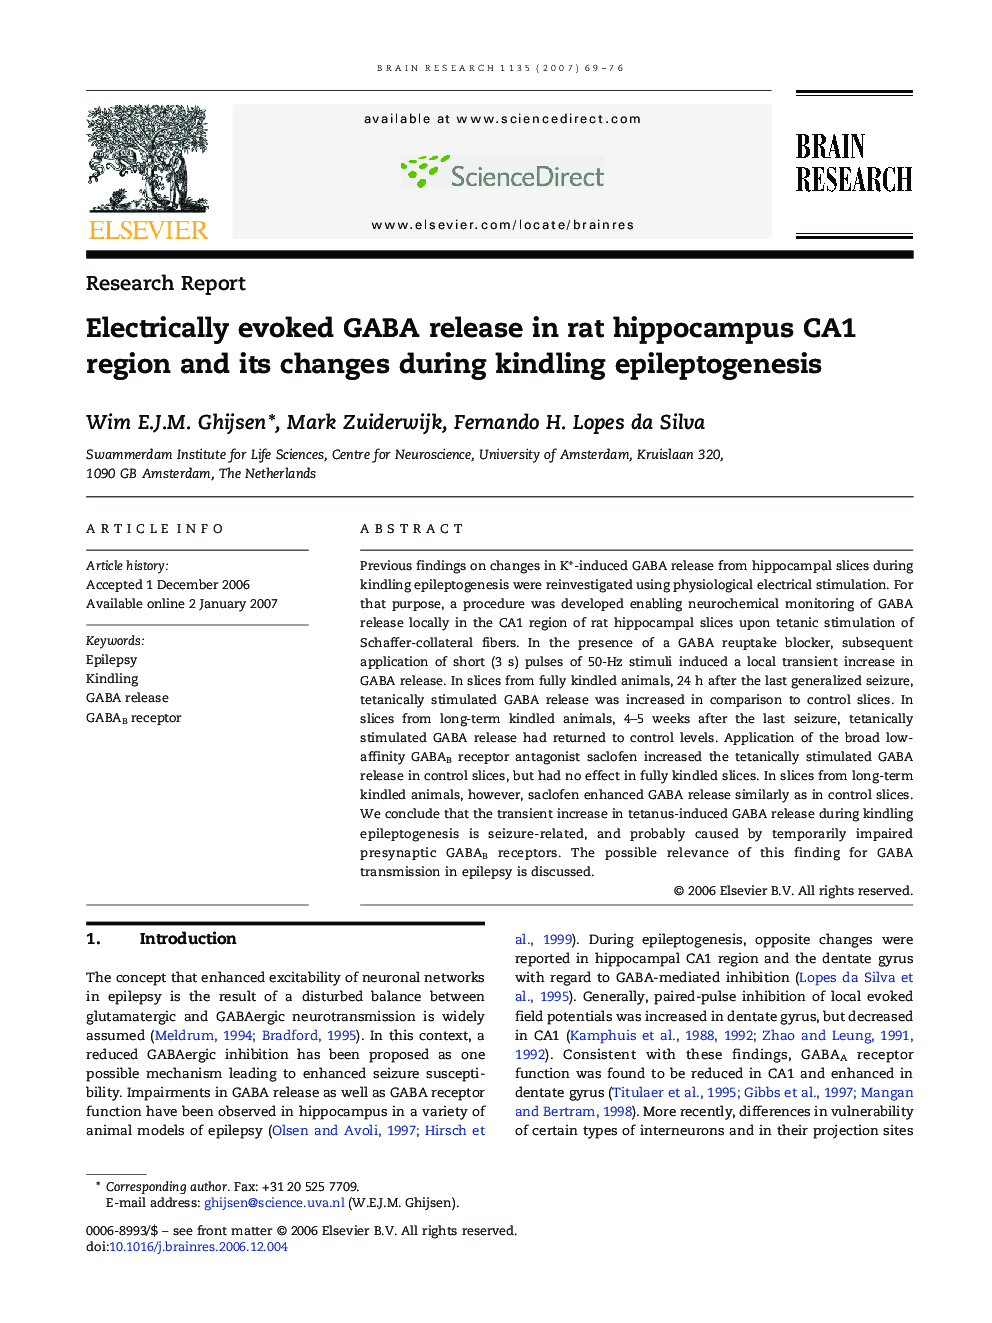 Research ReportElectrically evoked GABA release in rat hippocampus CA1 region and its changes during kindling epileptogenesis